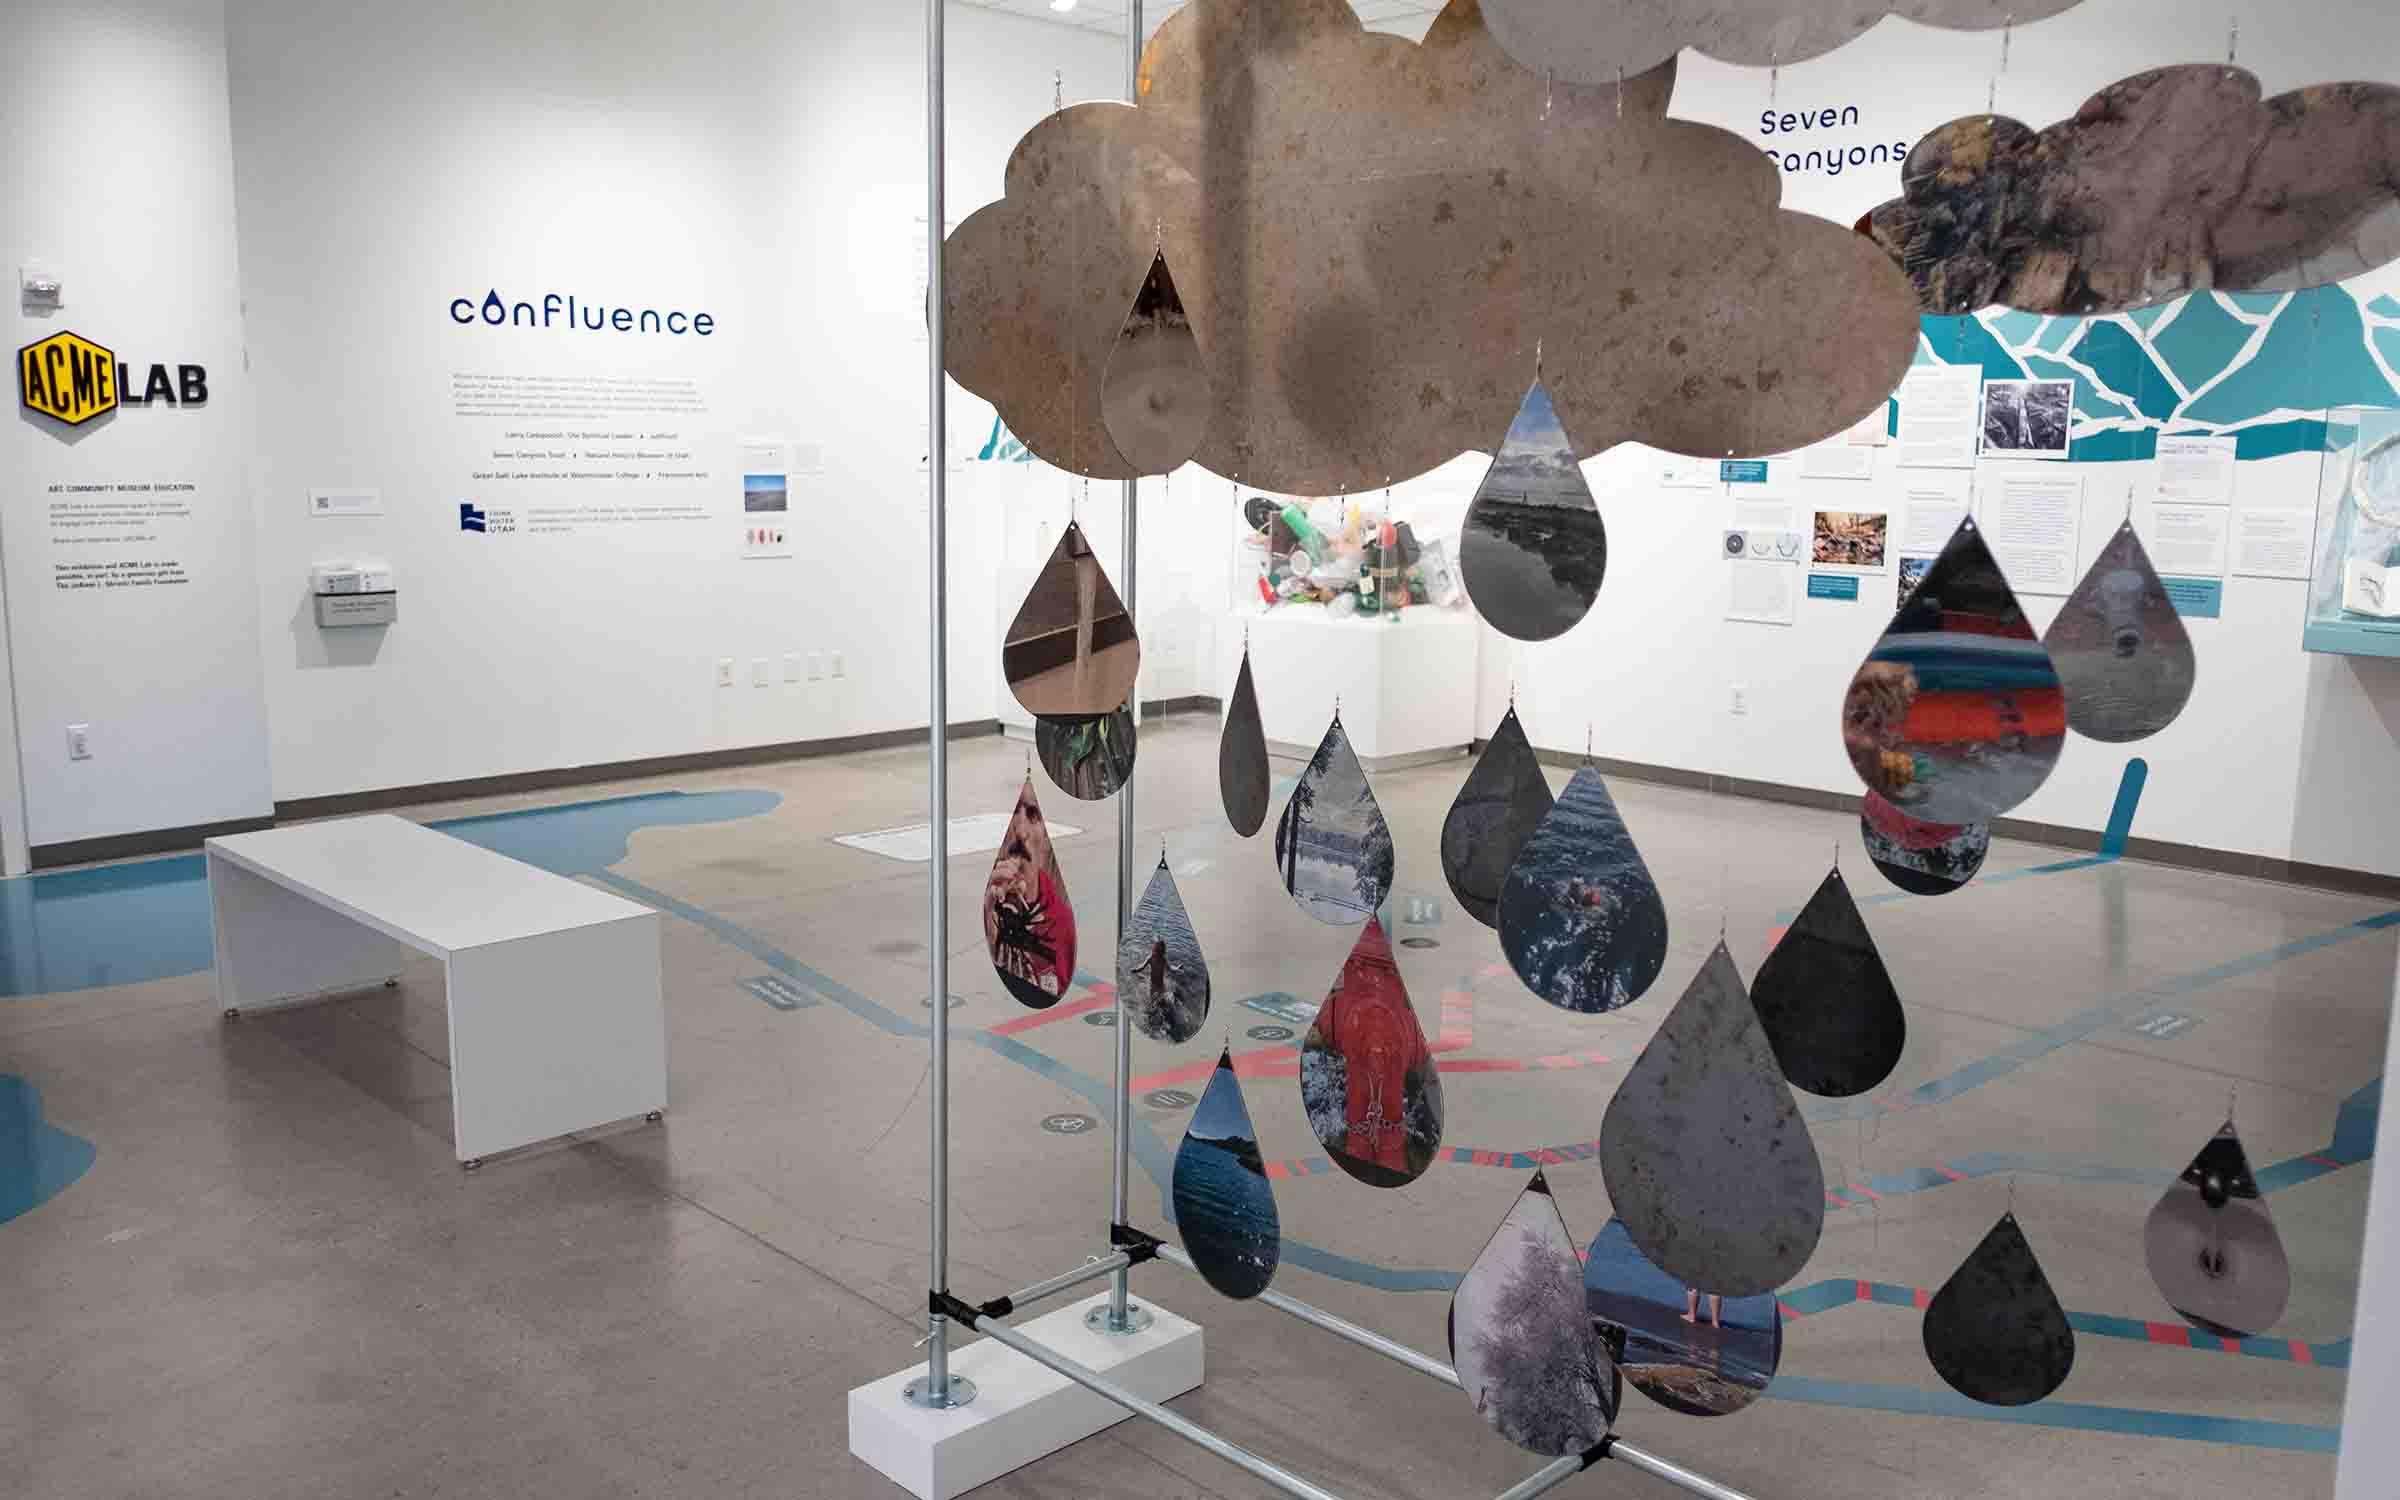 gallery view of Confluence, large sculpture of clouds and exaggerated raindrops made of sheet metal in the foreground 